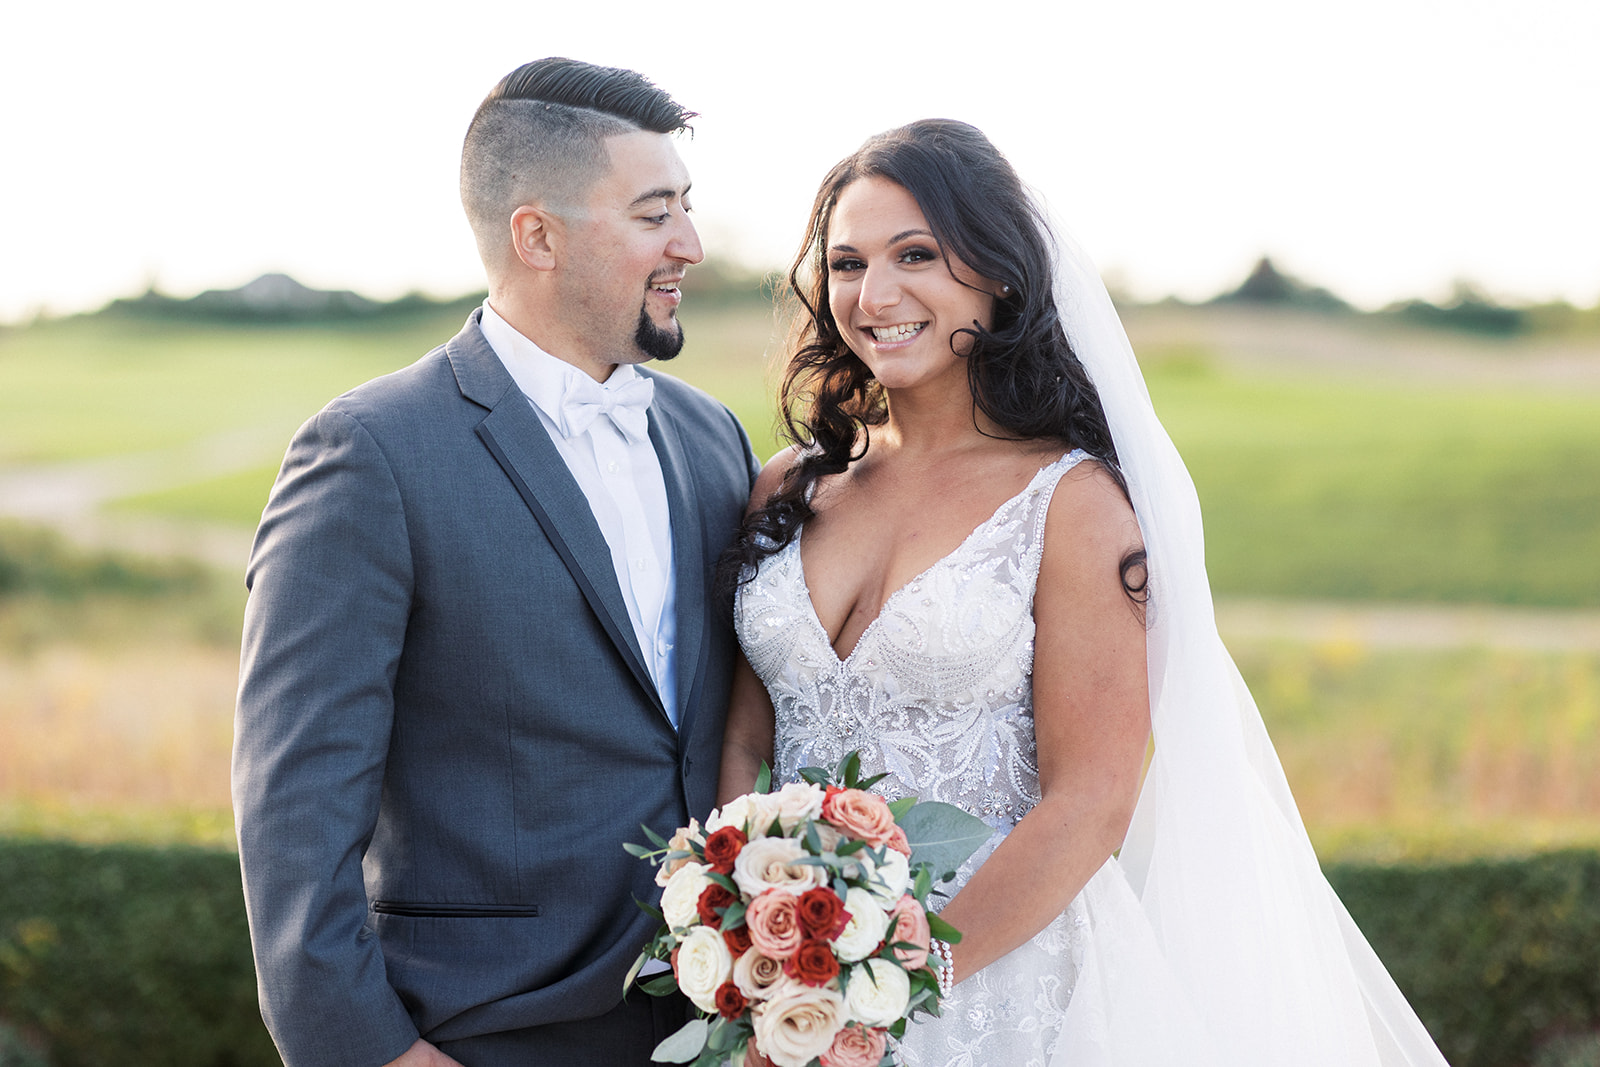 Newlyweds stand together holding the bouquet in a garden at sunset